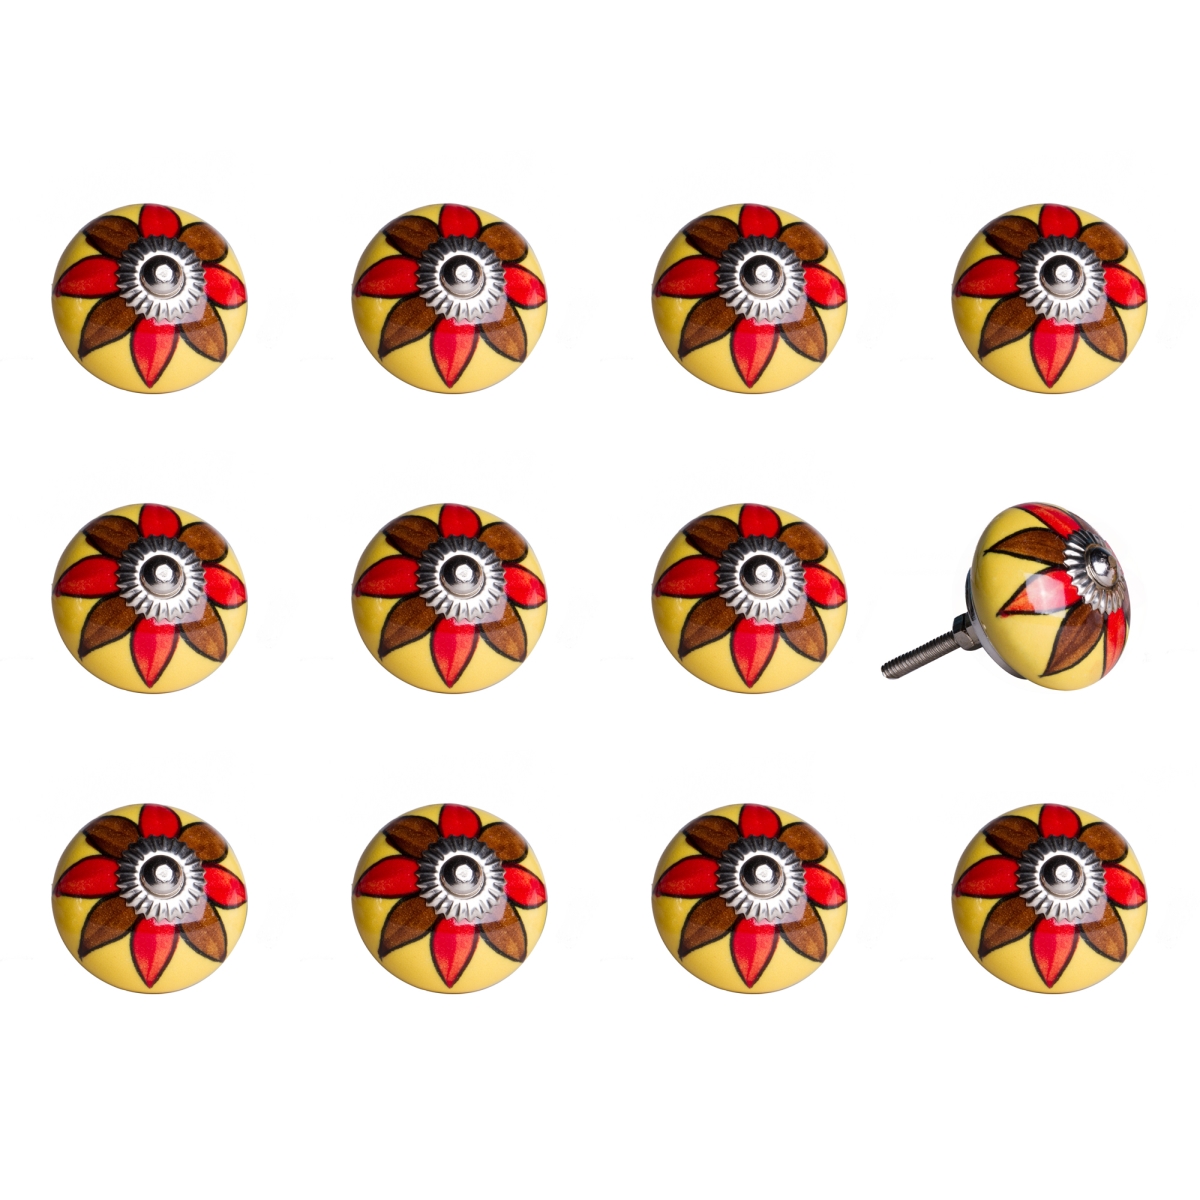 676685045201 Vintage Ceramic Hand Painted Knob Set - Red & Yellow - Pack Of 12